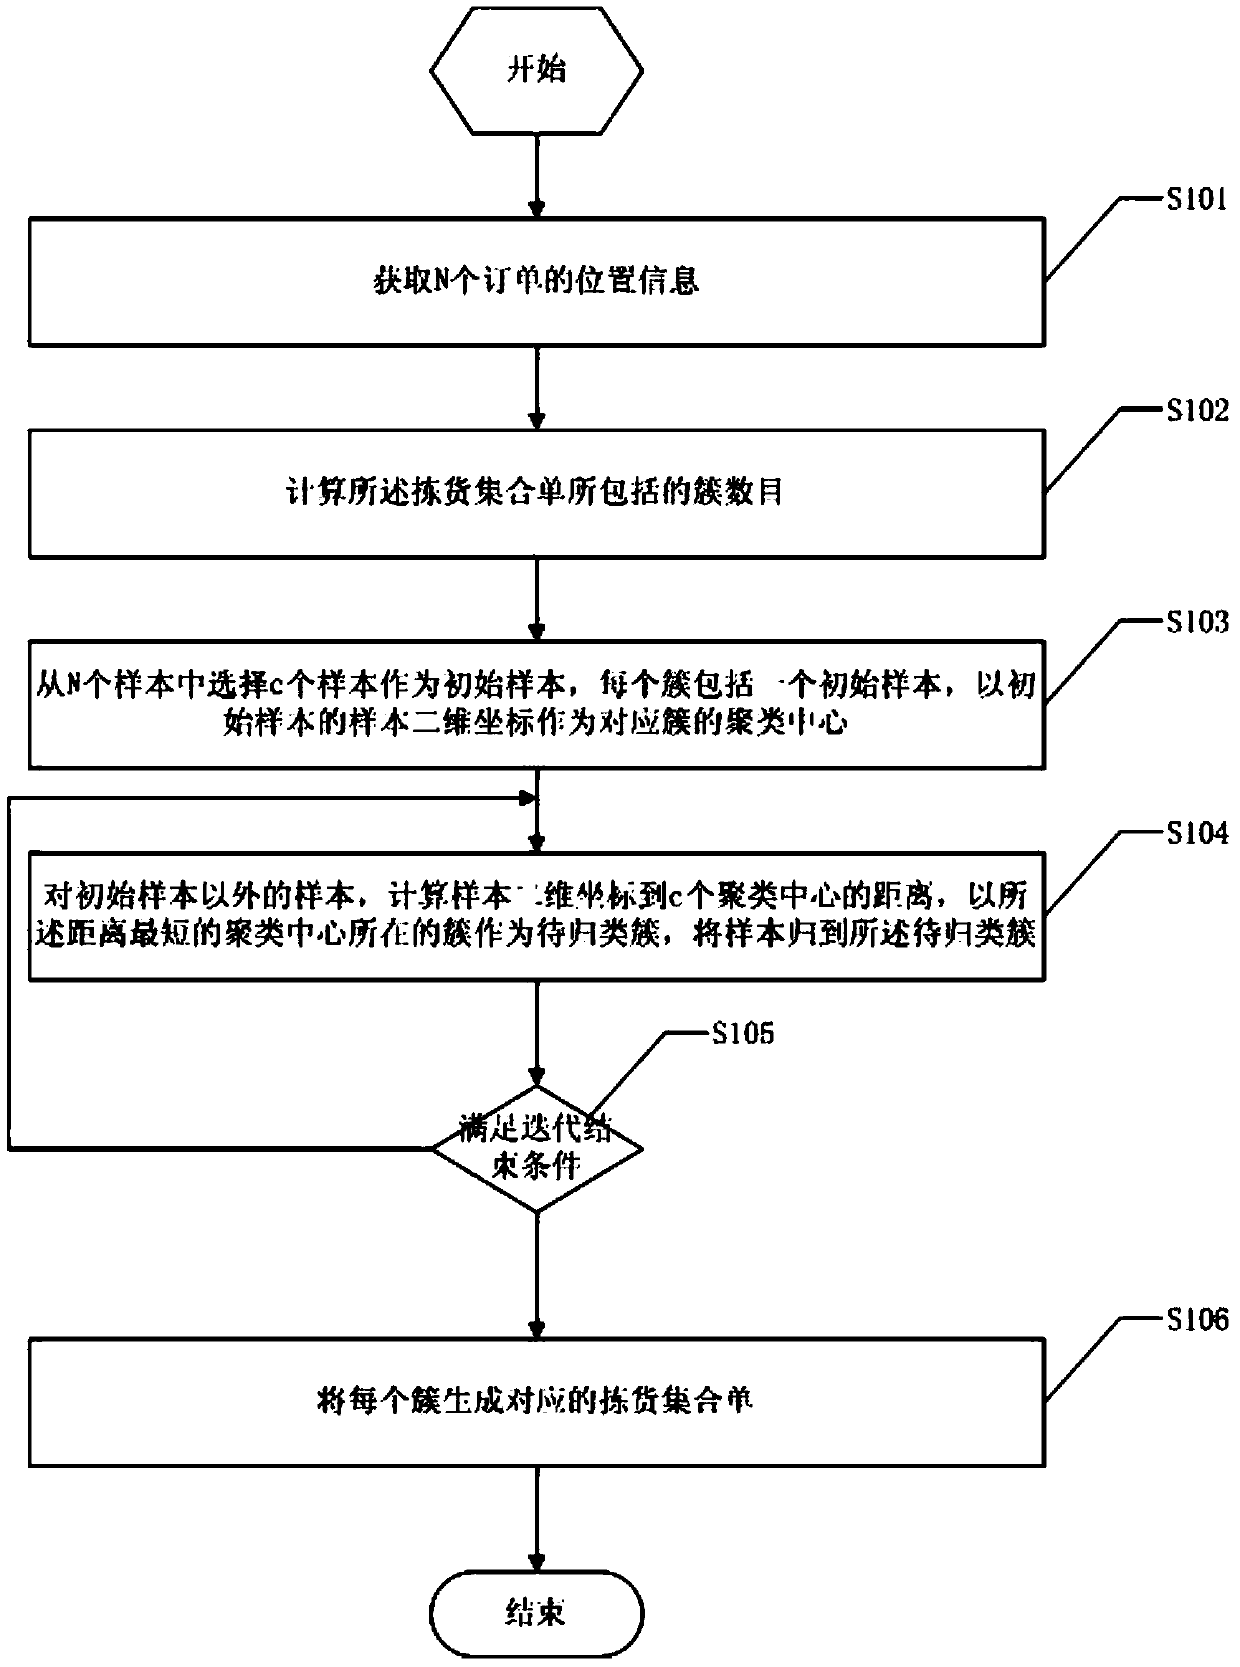 Method and device for generating order picking collection lists and method for optimizing order picking route